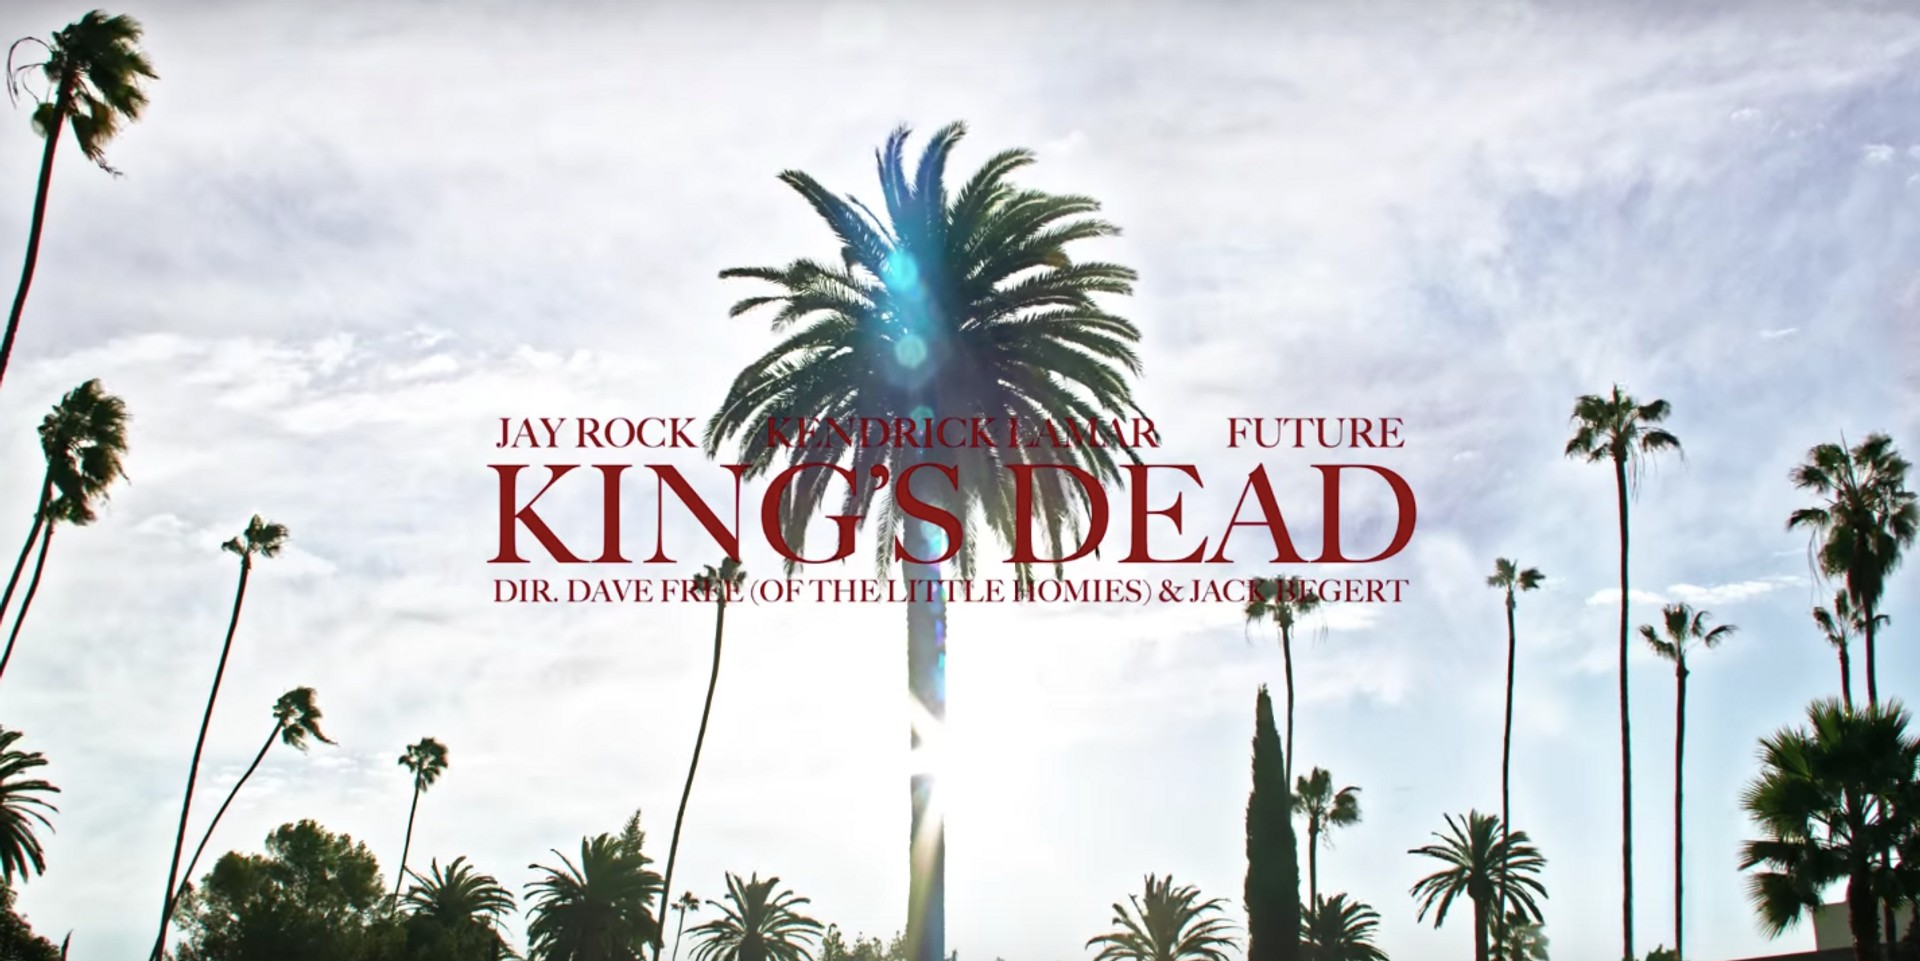 Jay Rock, Kendrick Lamar and Future release music video for 'King's Dead' – watch